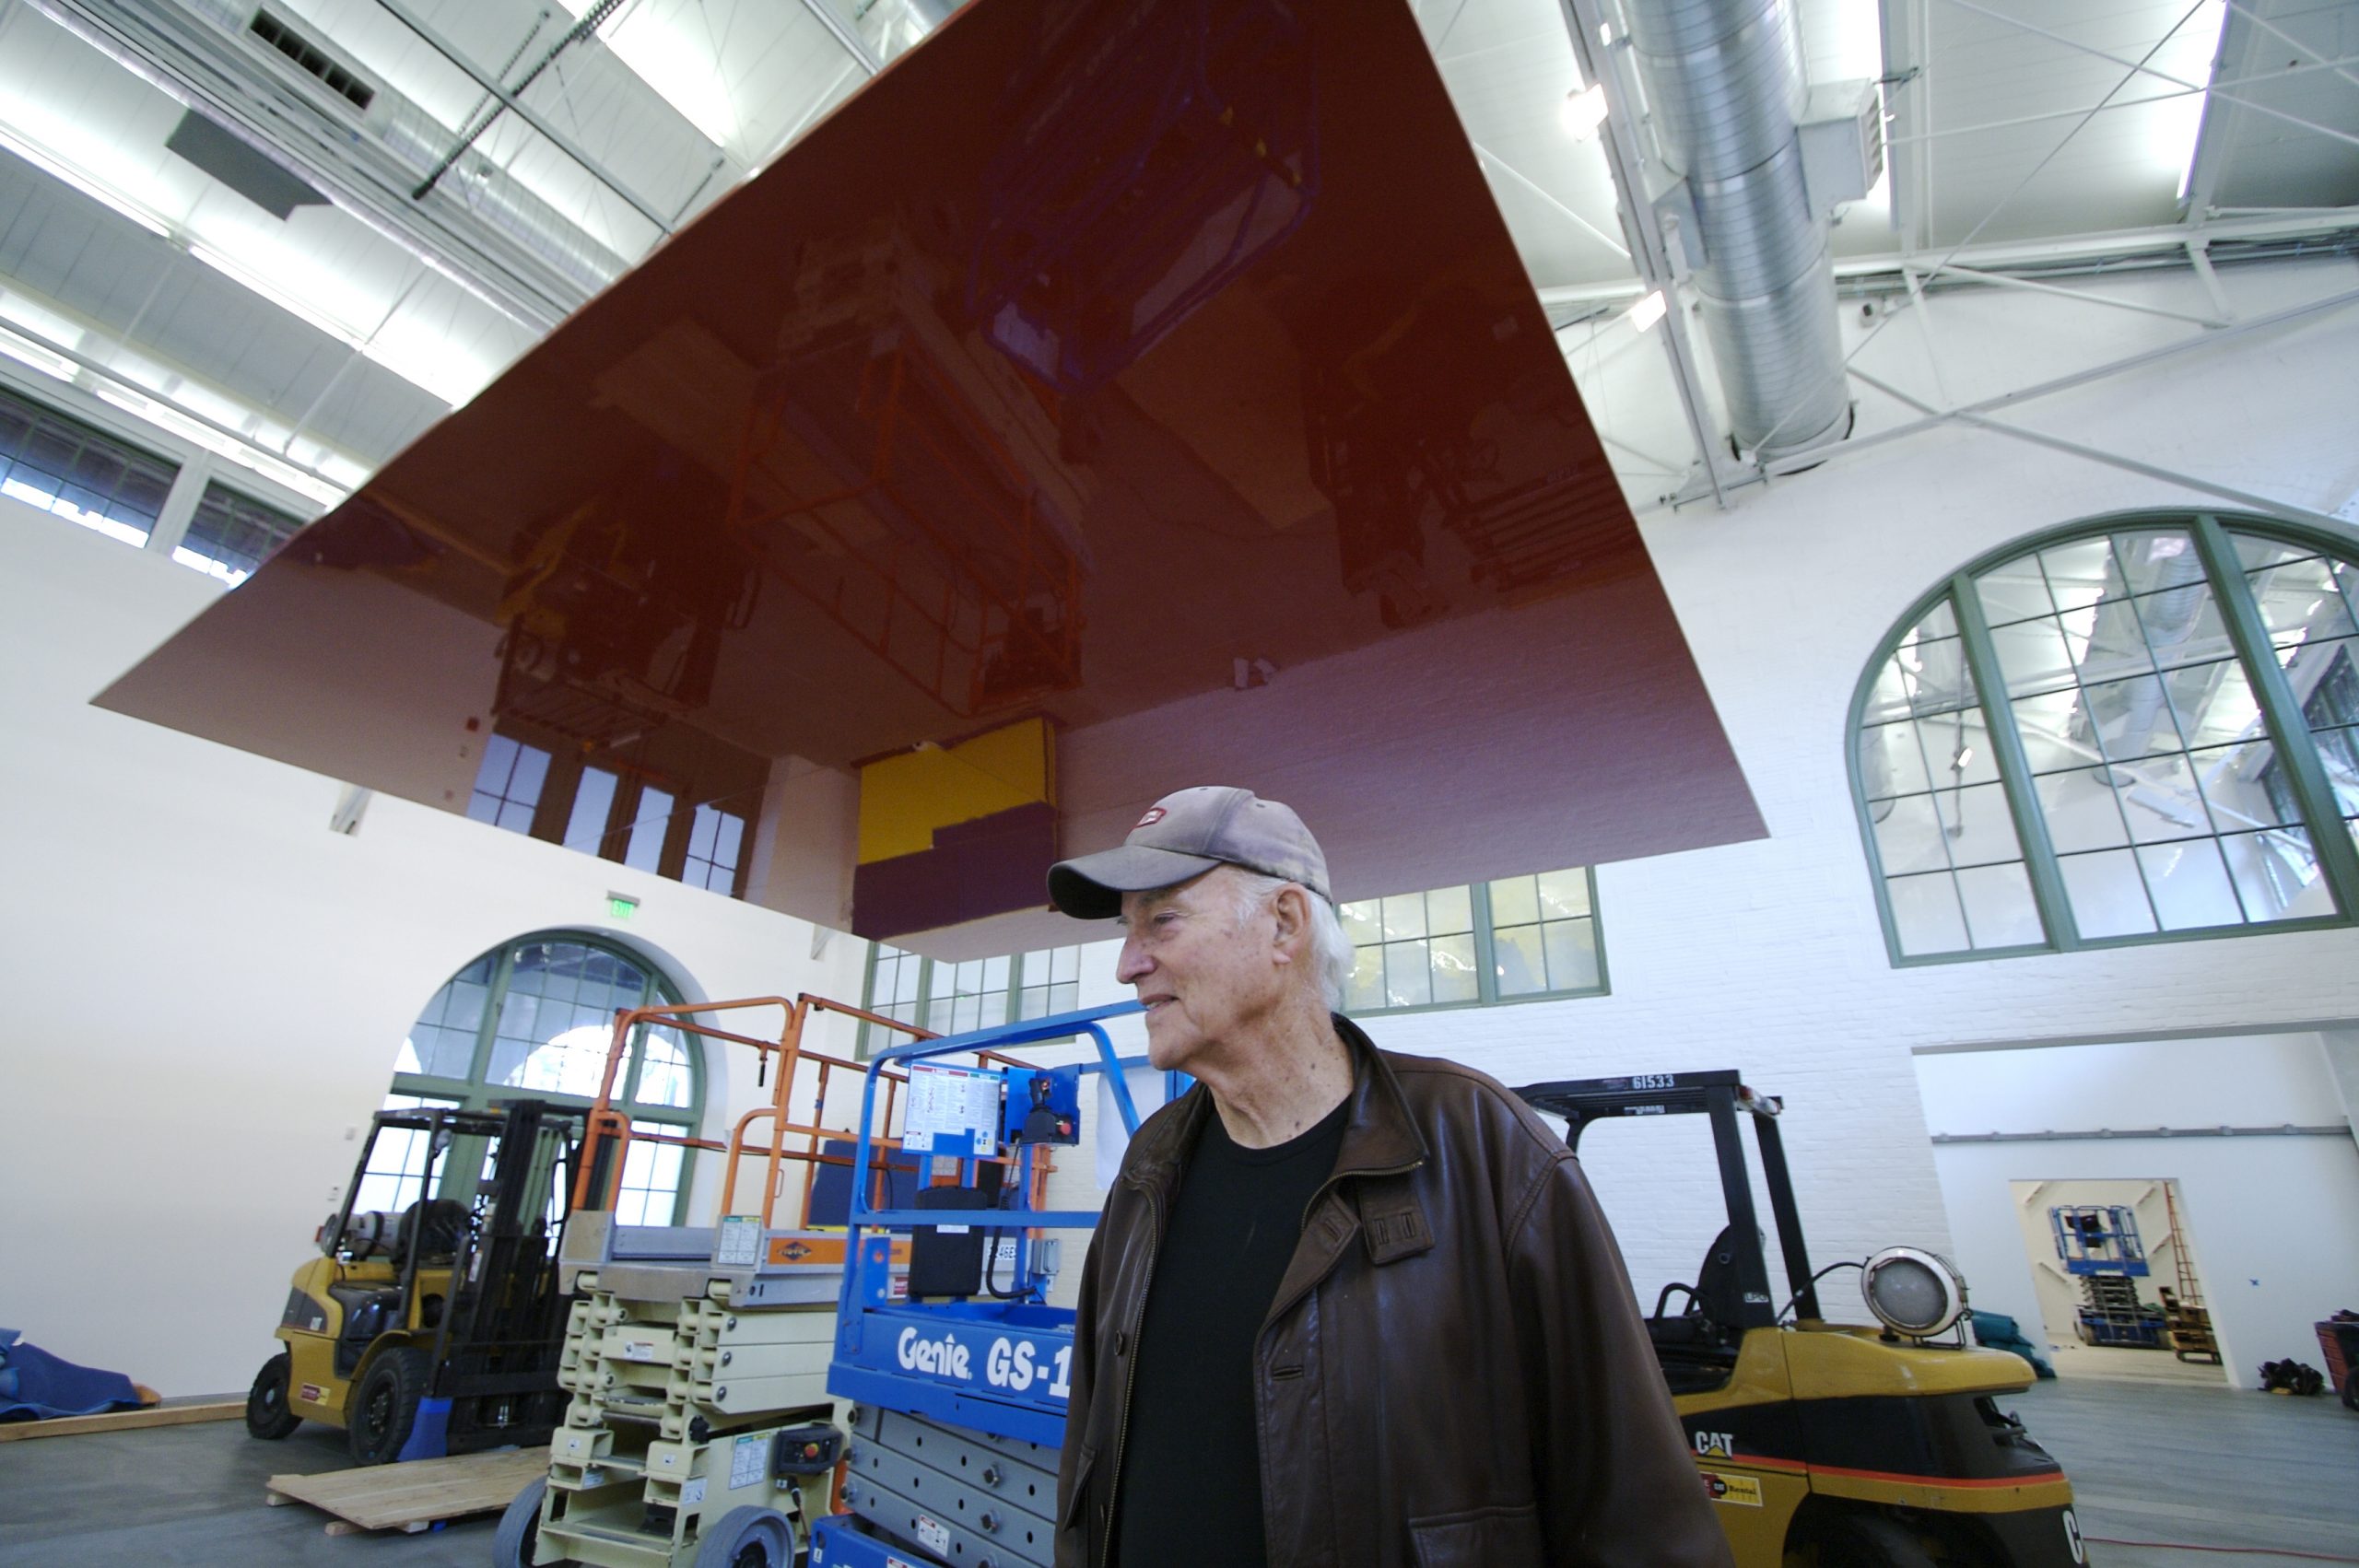 artist Robert Irwin working on production of an installation within the museum of contemporary art in Downtown San Diego